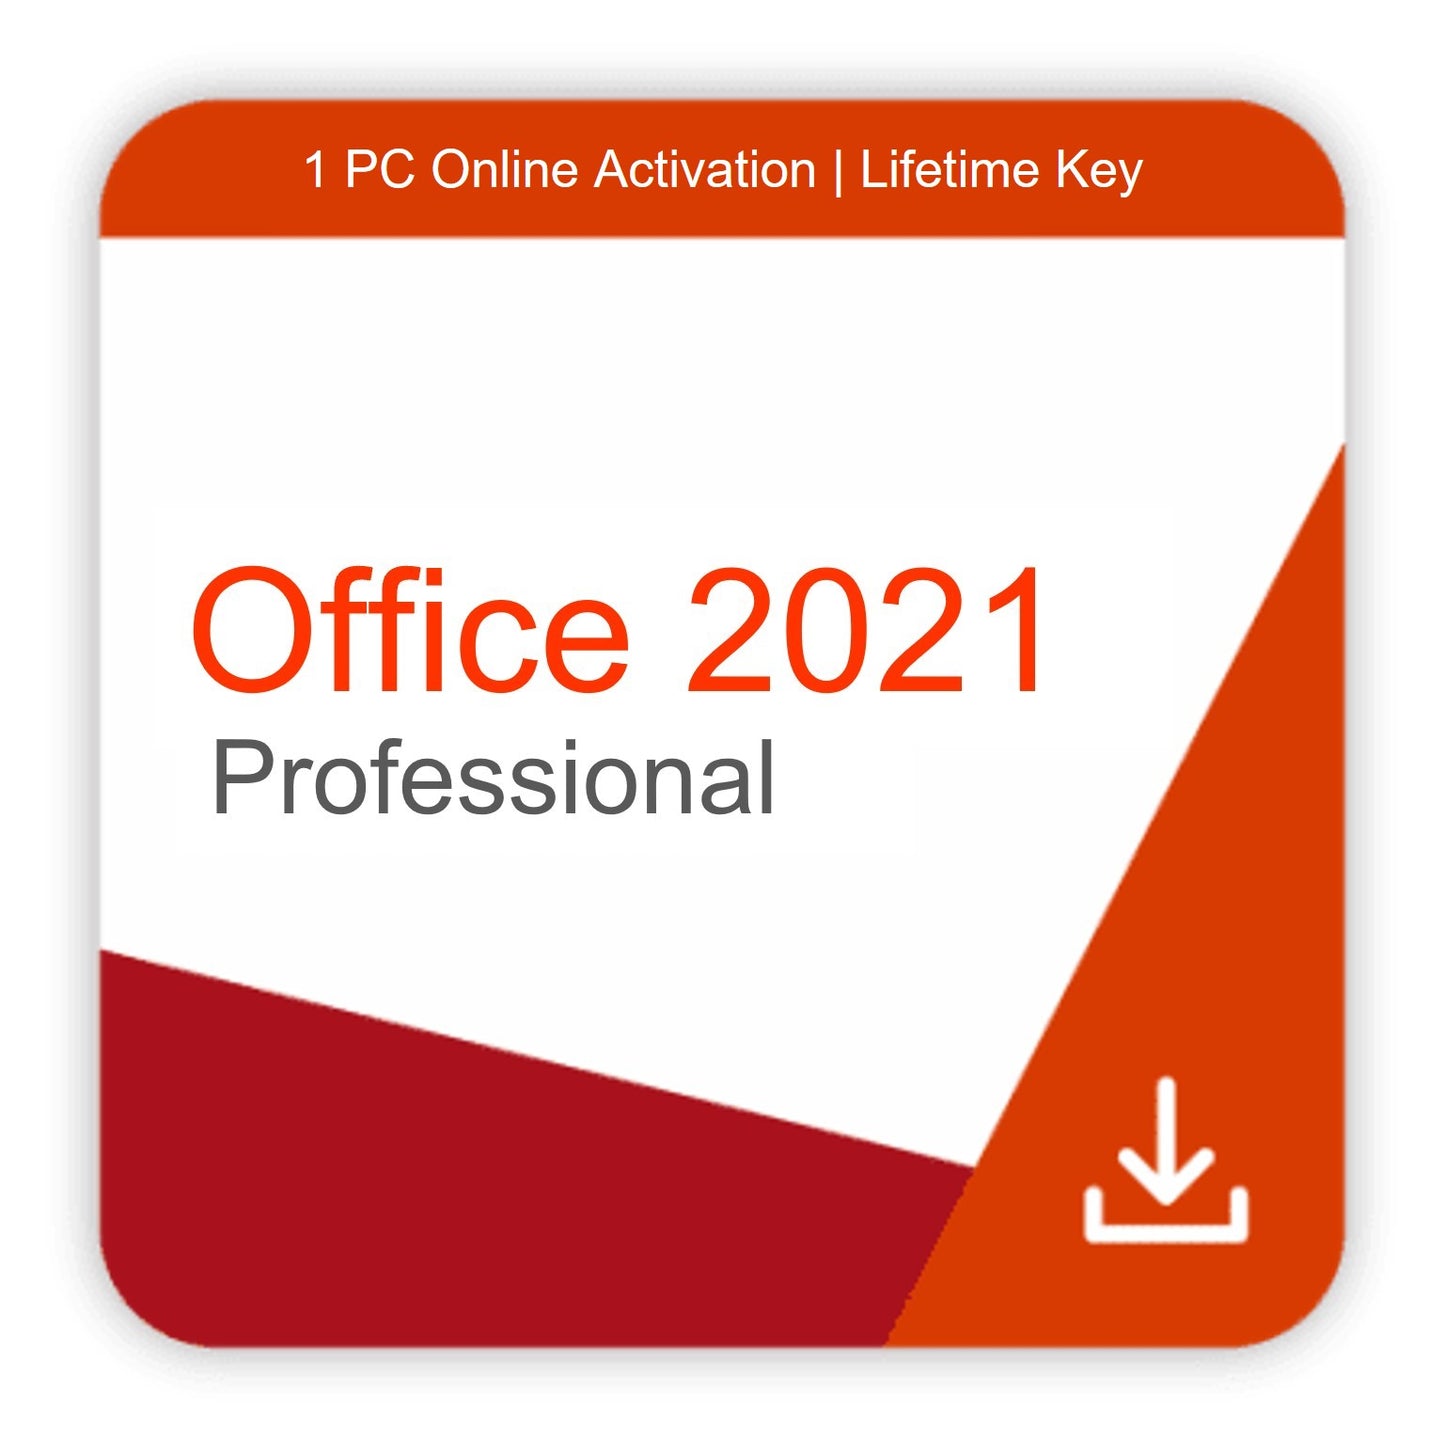 Office 2021 Professional Online